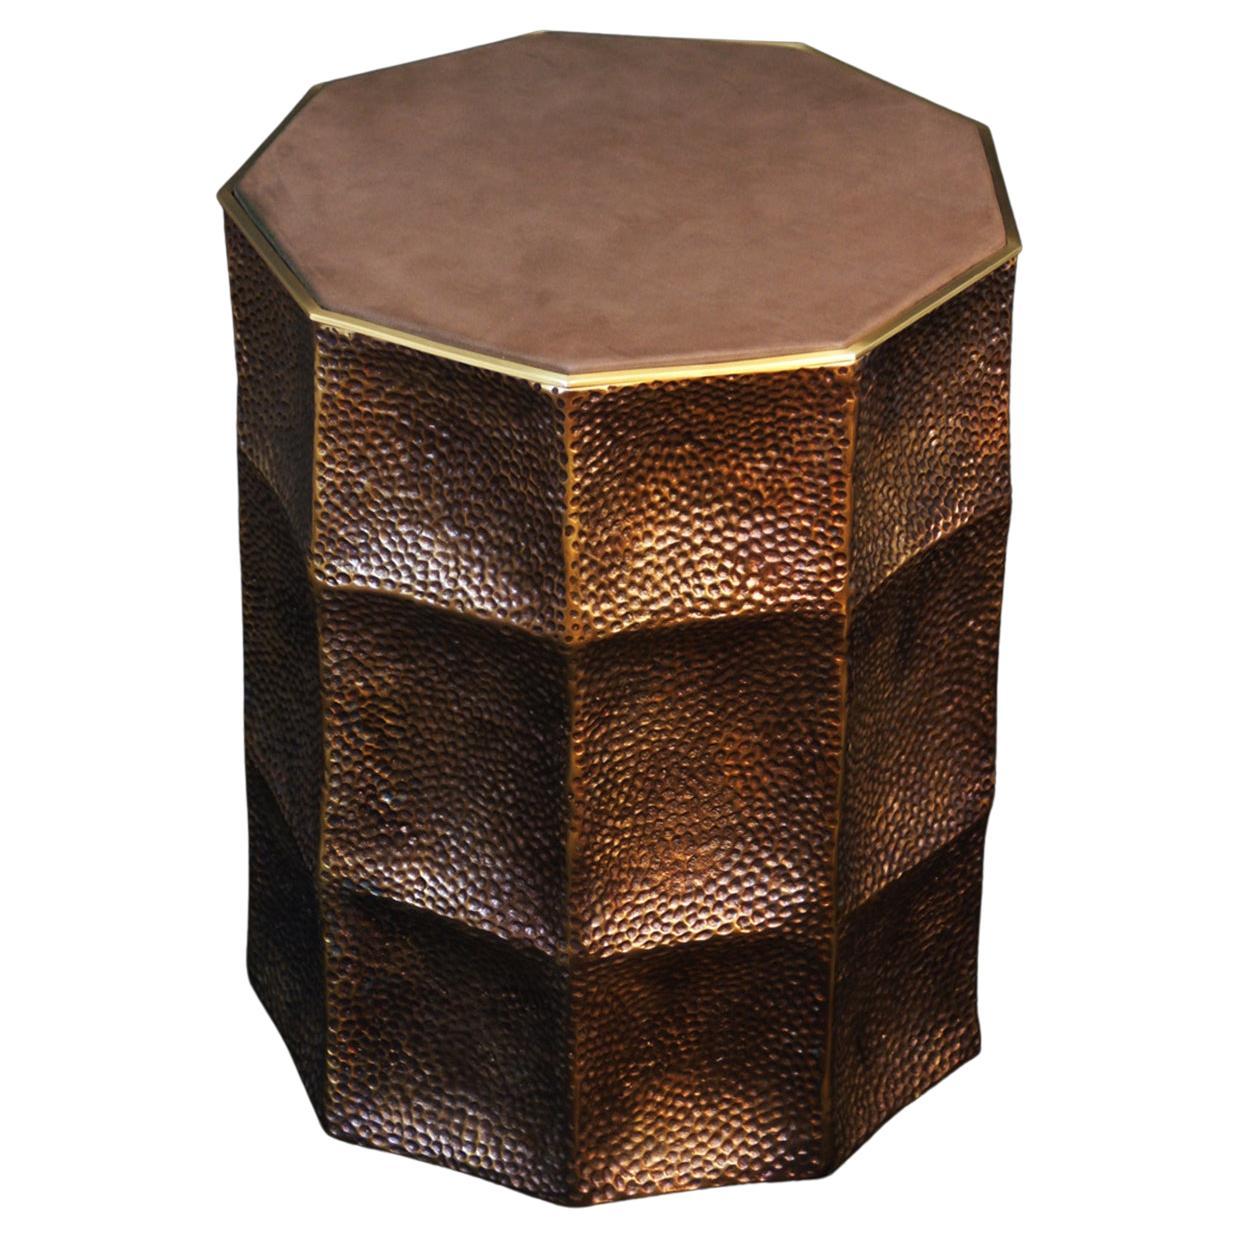 Rhino Side Table by Atelier Demichelis